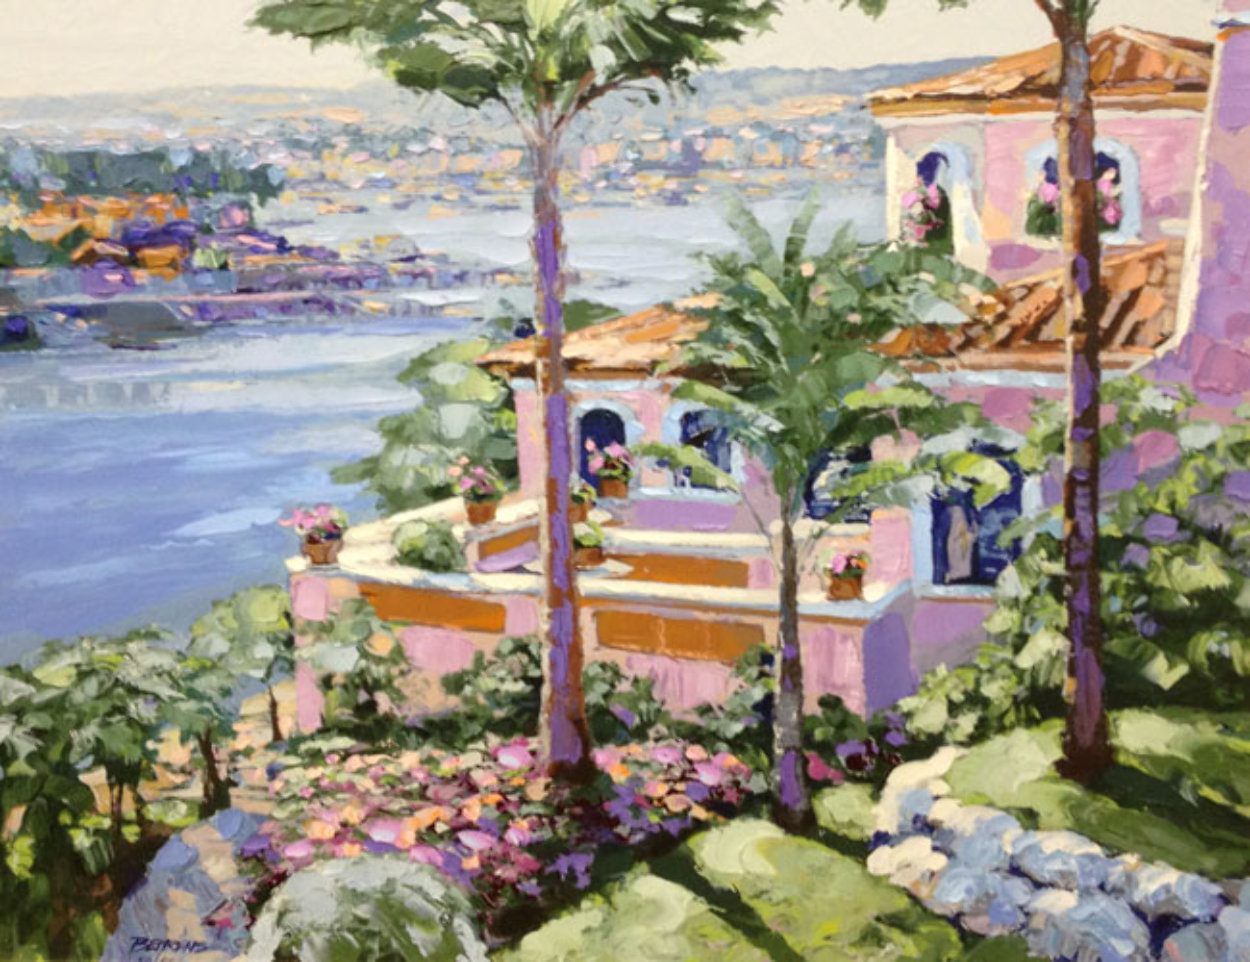 Newport Beach - From the California Suite Limited Edition Print by Howard Behrens